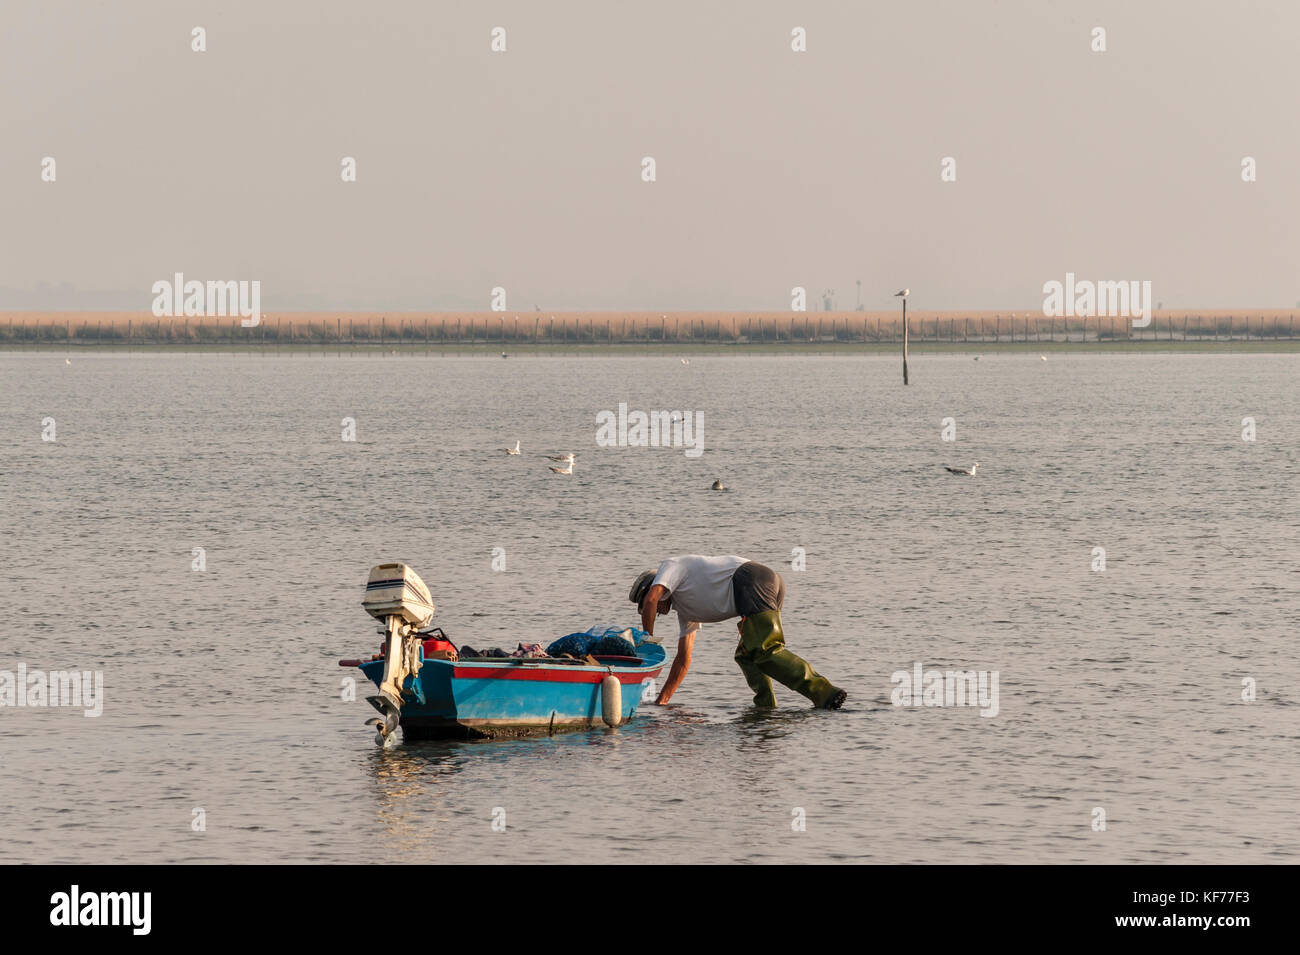 Venice, Italy. A fisherman gathering shellfish in the shallow water of the Venetian lagoon, at sunrise Stock Photo